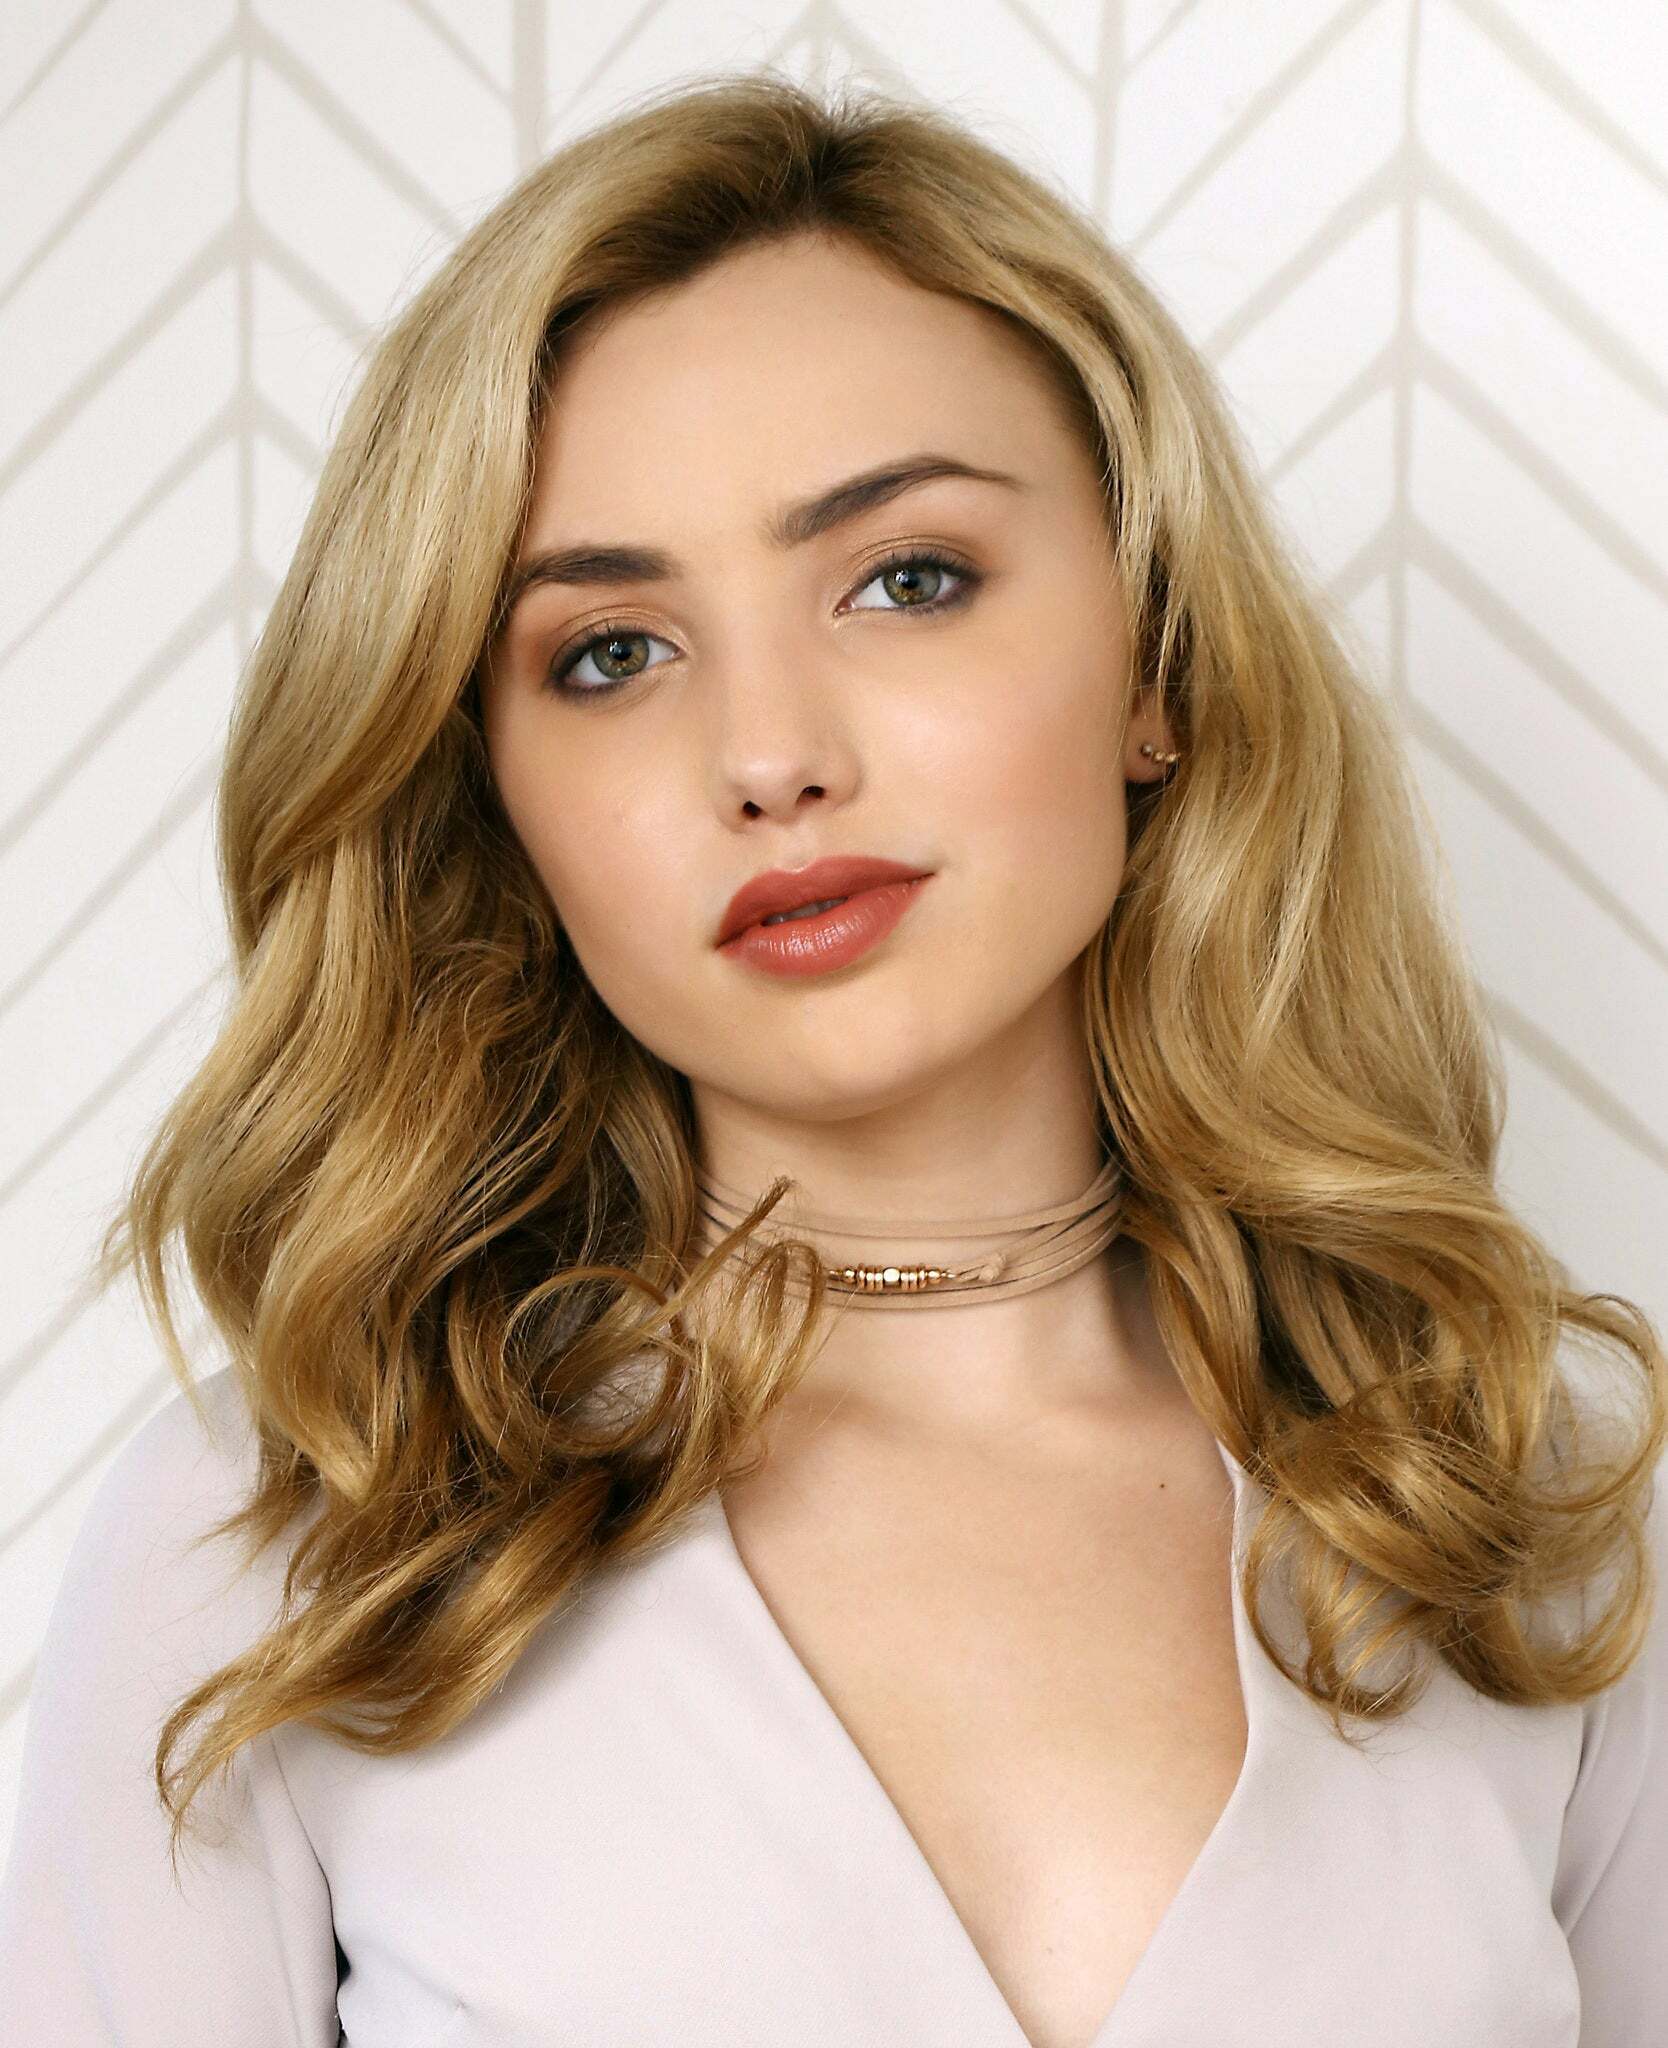 Peyton List is an amazing blonde. Adorable and sexy.